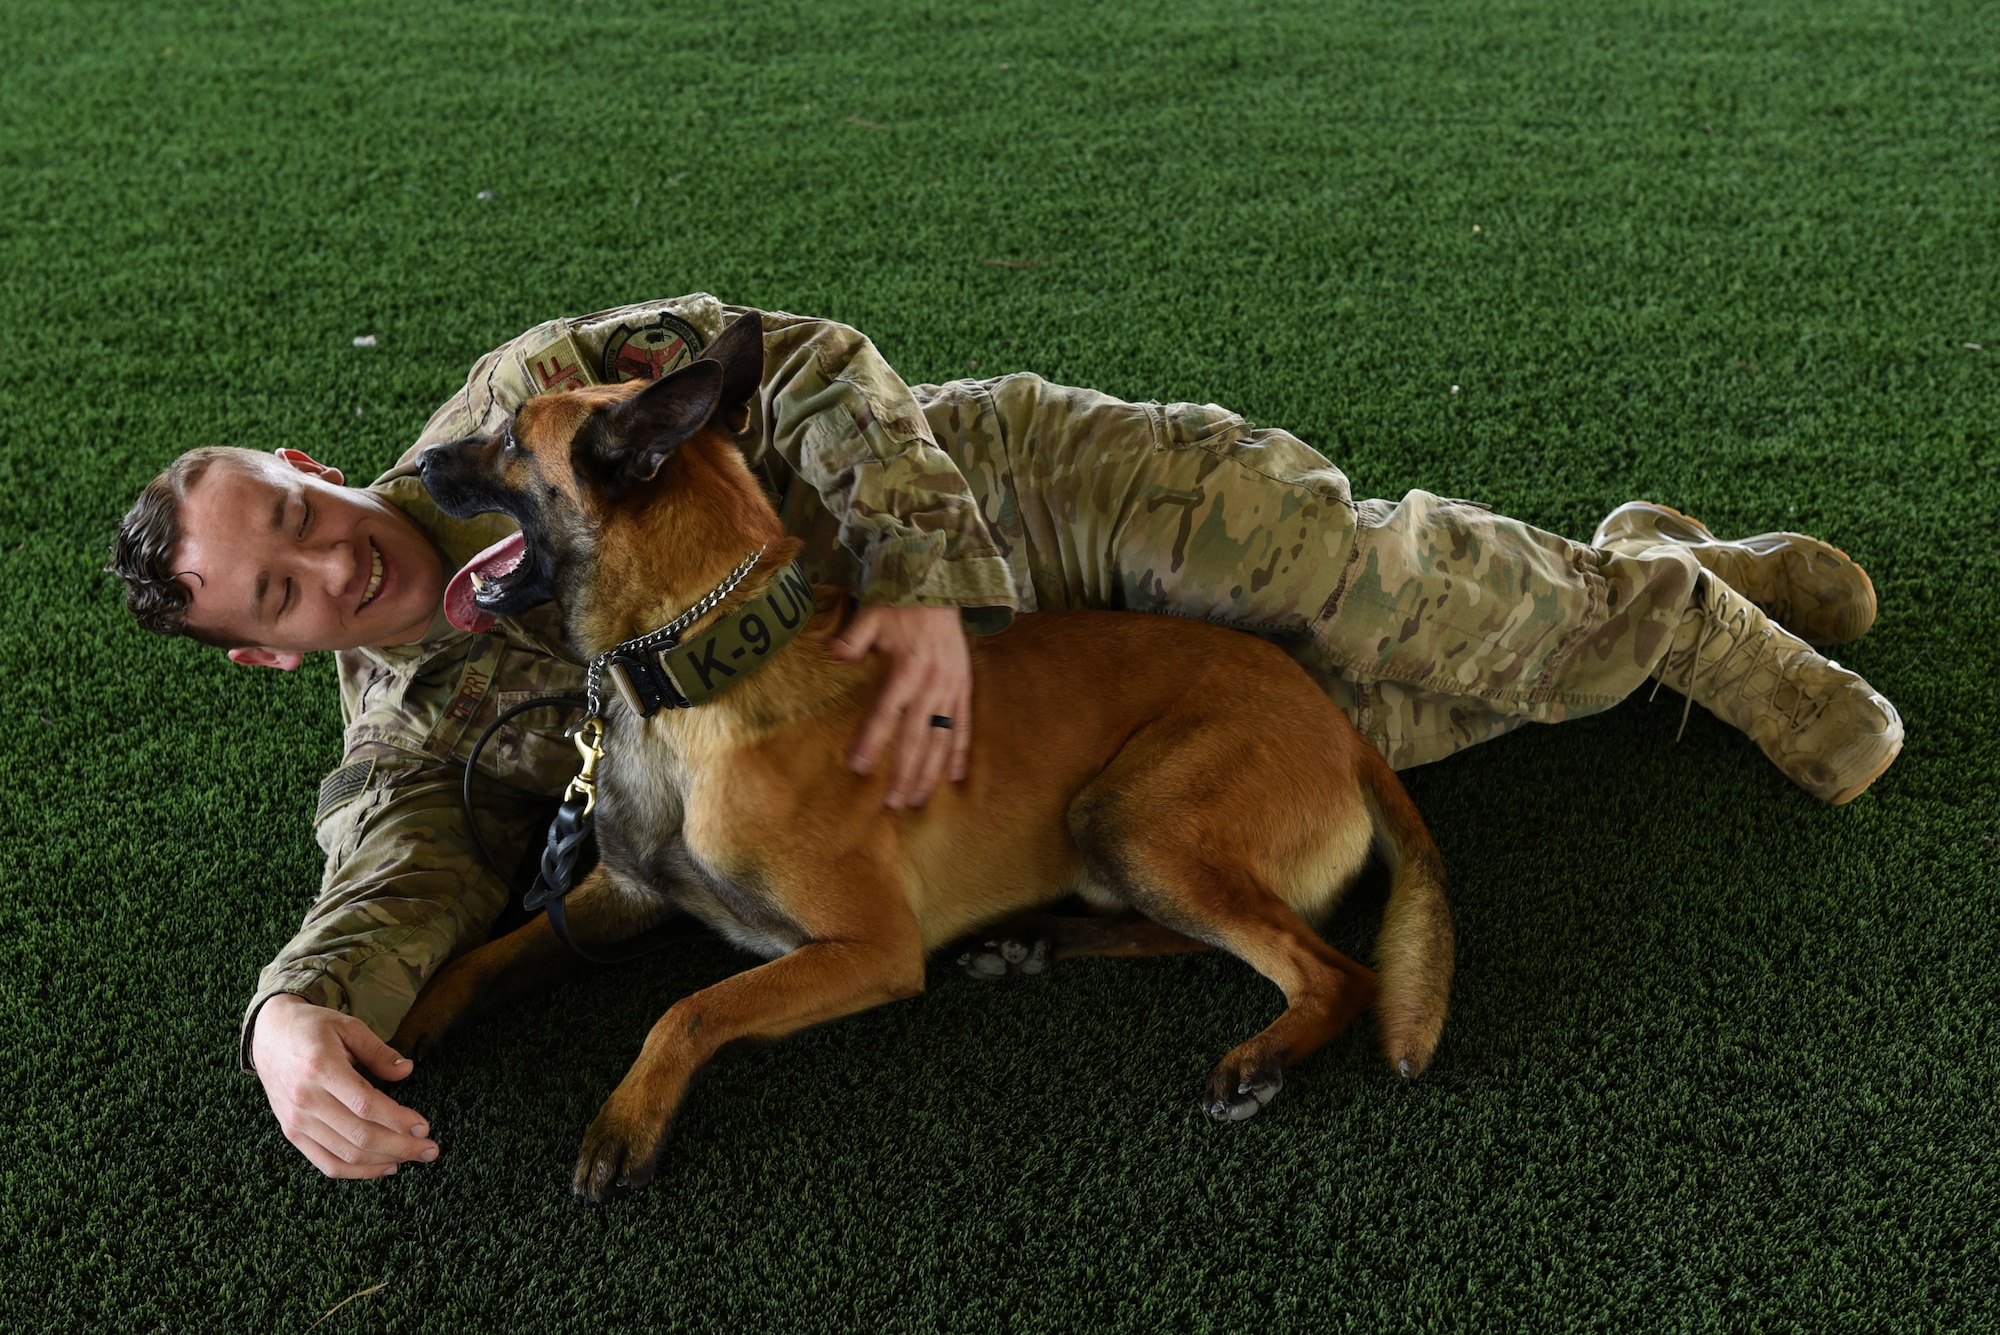 U.S. Air Force Senior Airman James Terry, 20th Security Forces Squadron (SFS) military working dog (MWD) handler, and Tank, 20th SFS MWD, relax after practicing basic obedience commands at Shaw Air Force Base, S.C., Feb. 4, 2019.